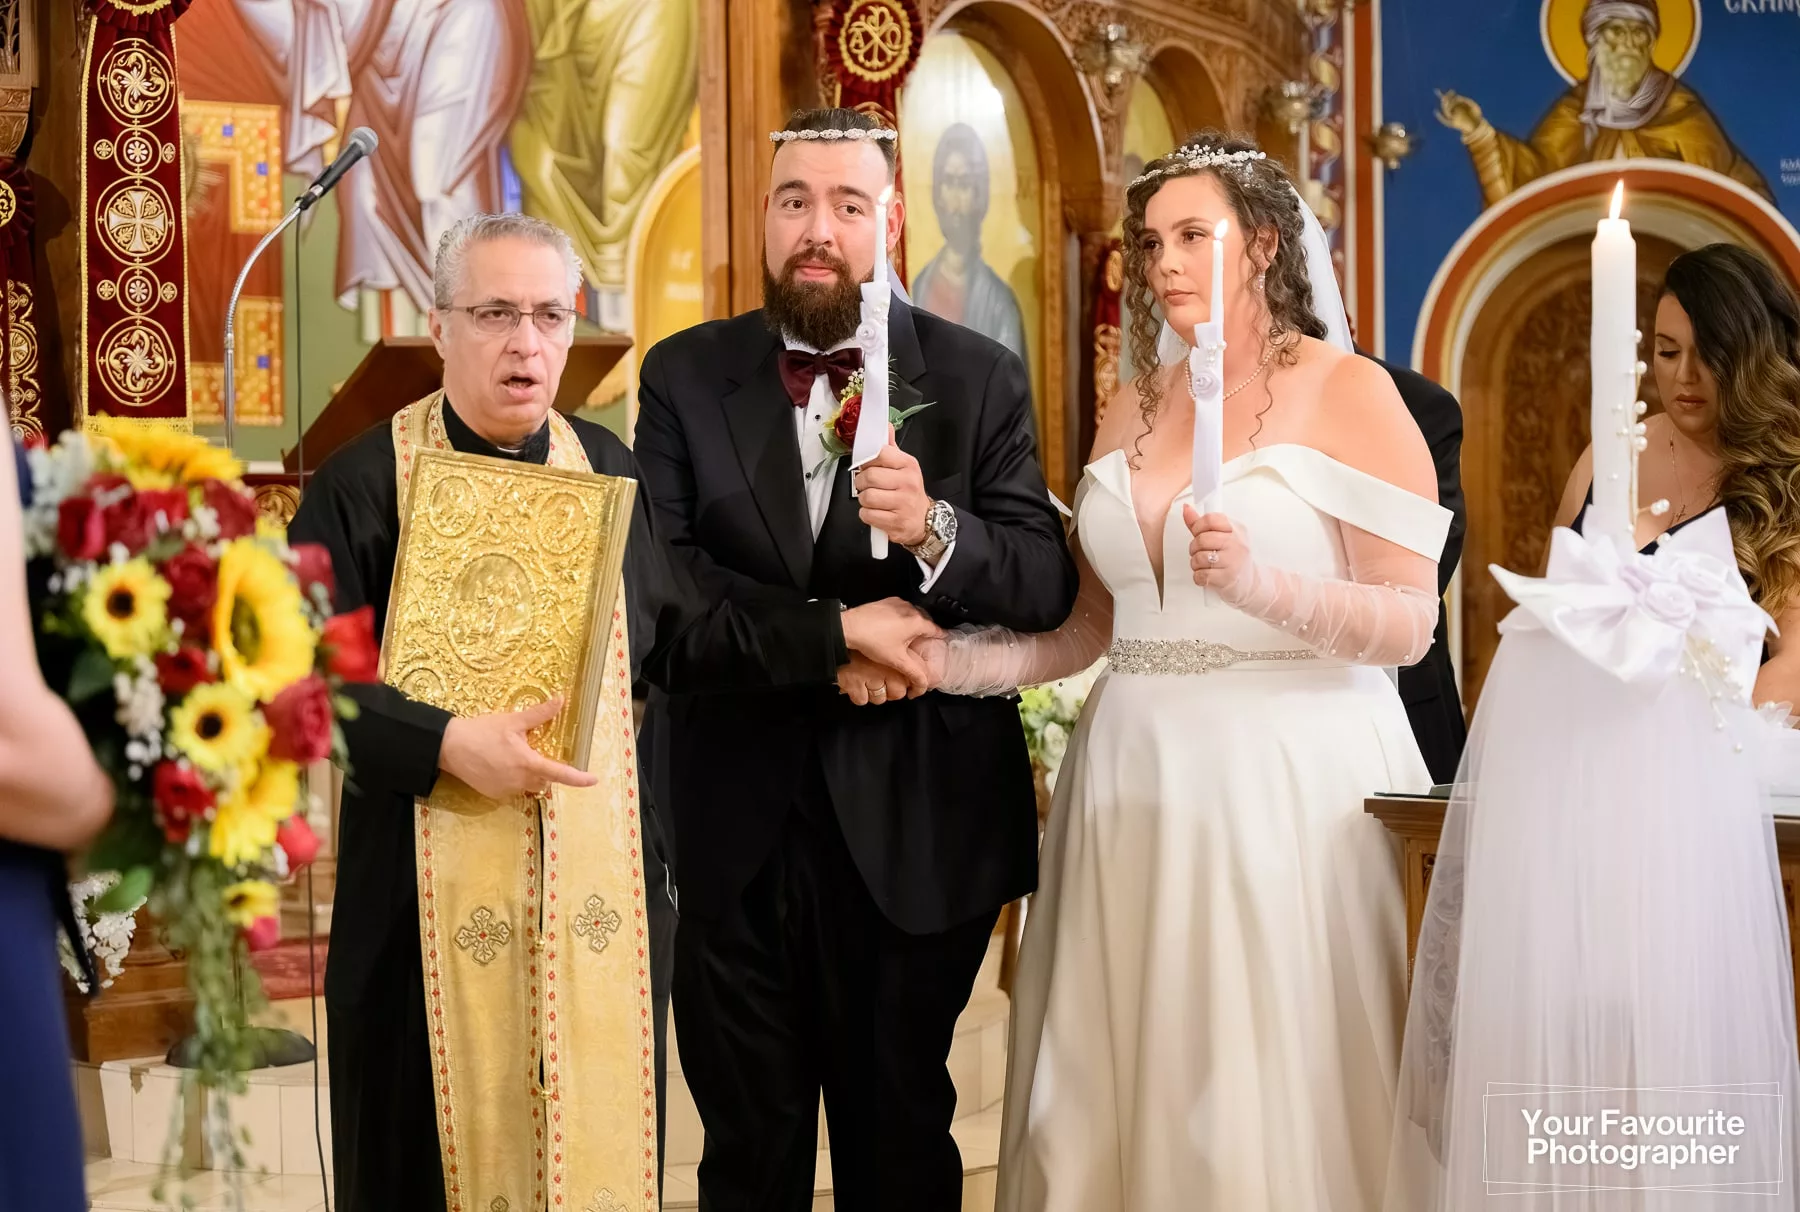 Couple getting married at St. George's Greek Orthodox Church in downtown Toronto